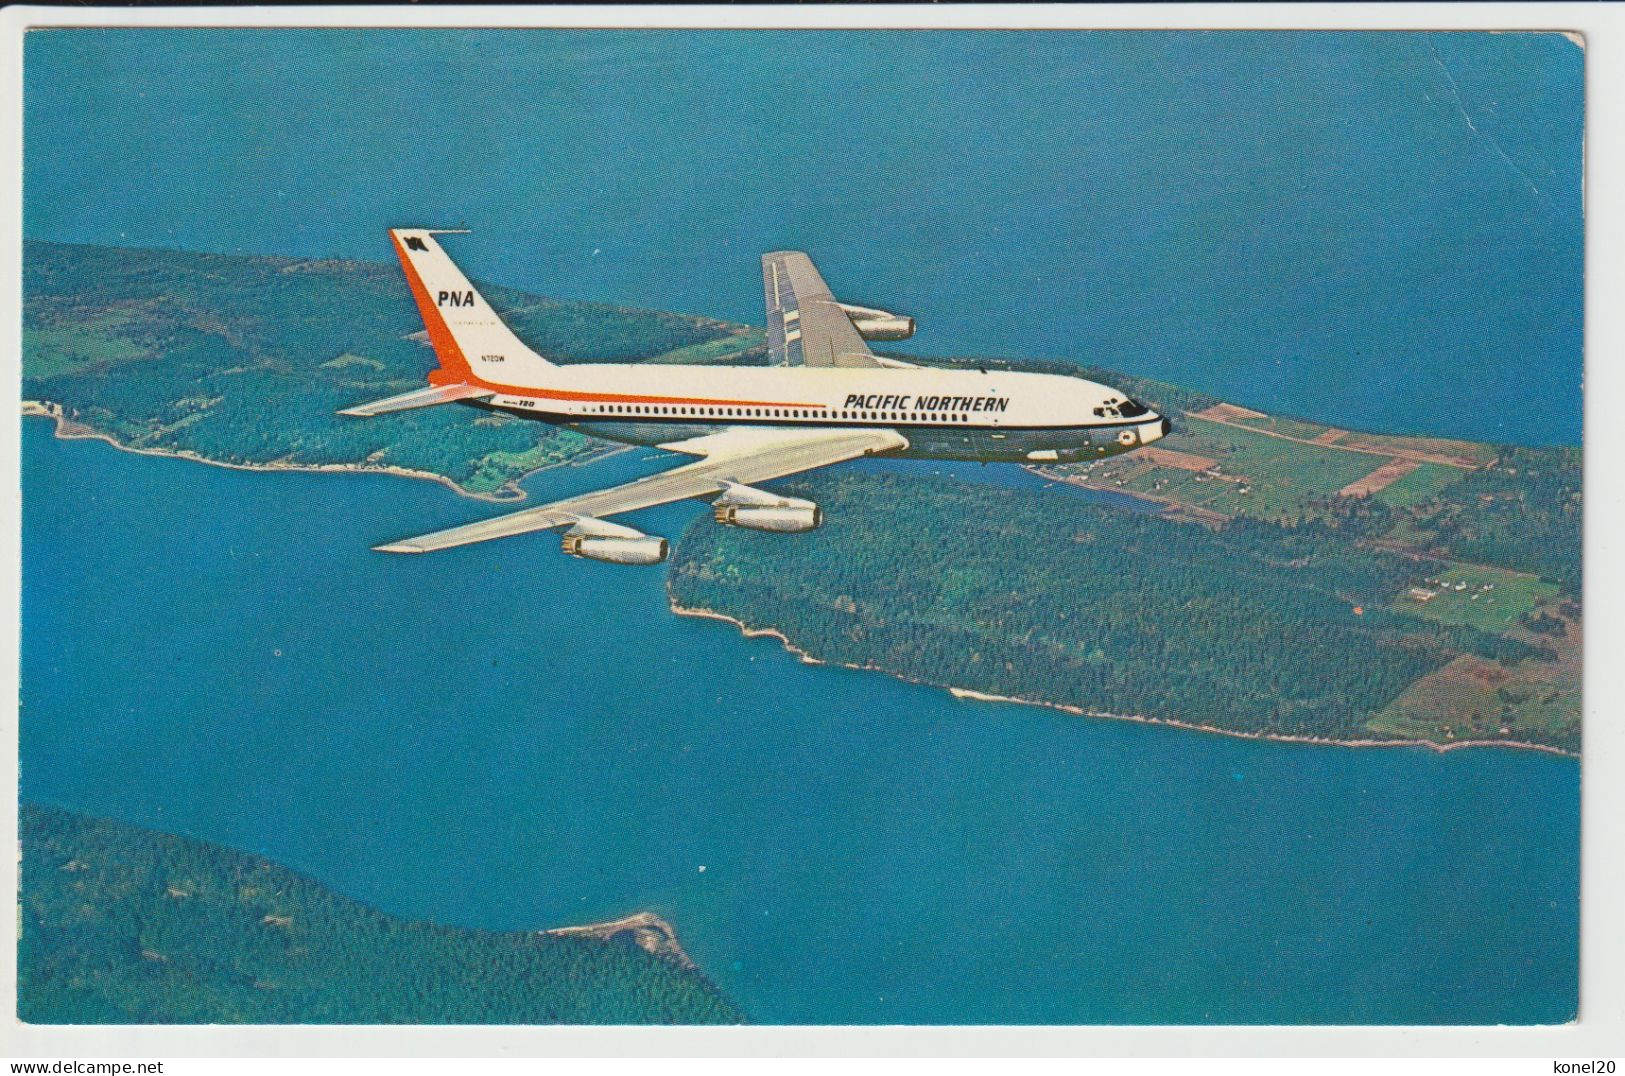 Vintage Pc PNA Pacific Northern Airlines Boeing 720 Aircraft - 1919-1938